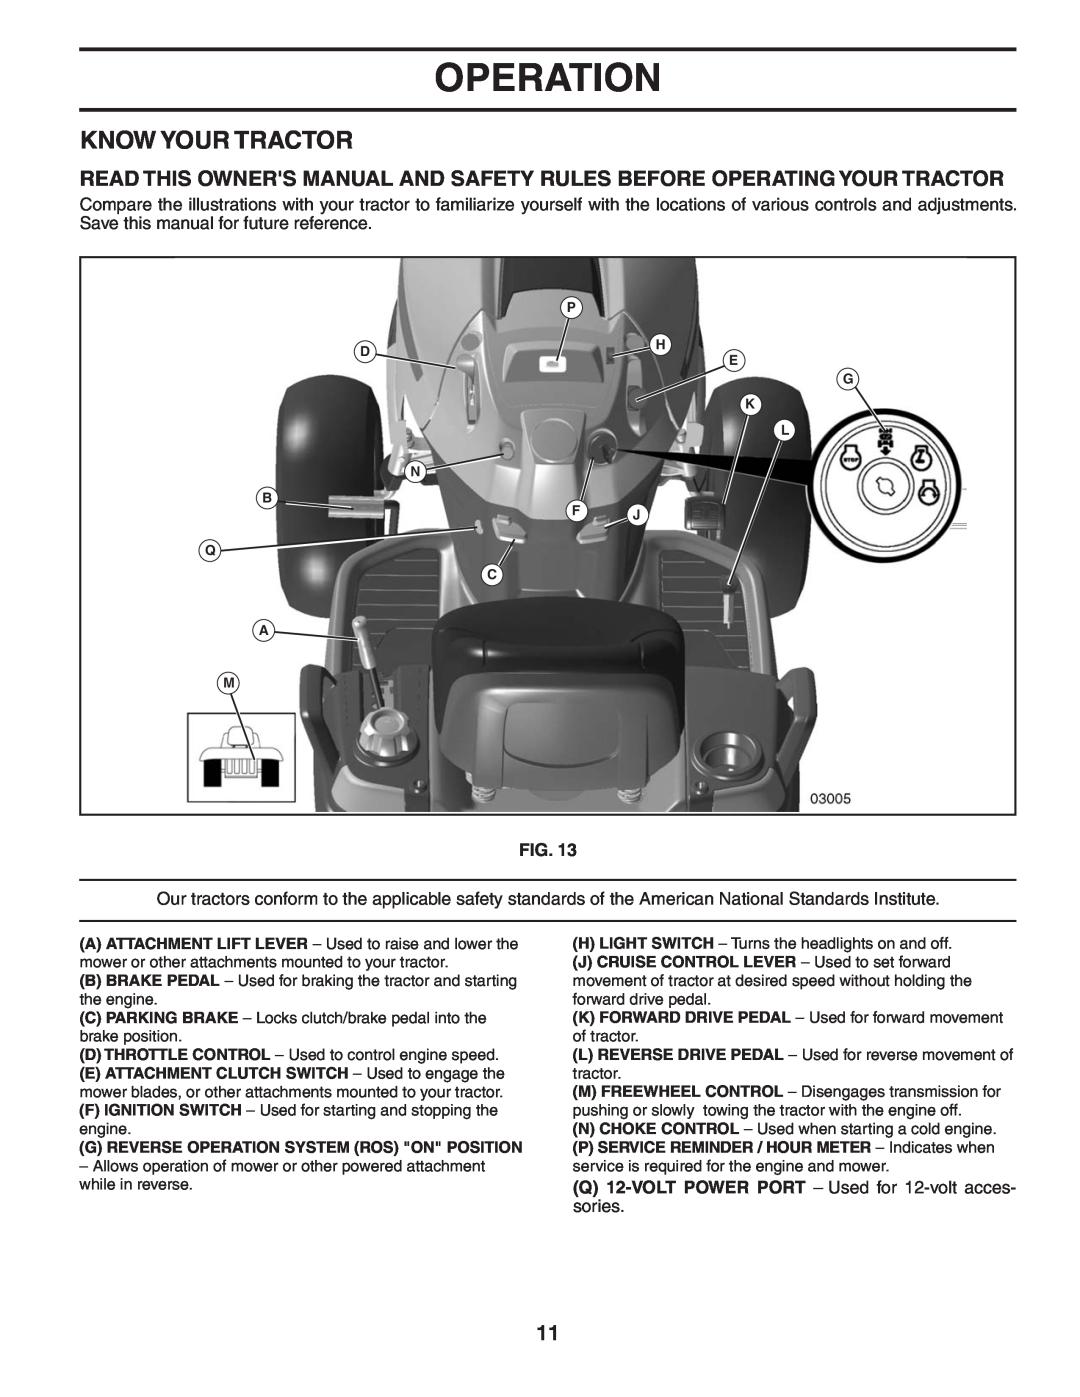 Husqvarna YTH2454T owner manual Know Your Tractor, Operation 